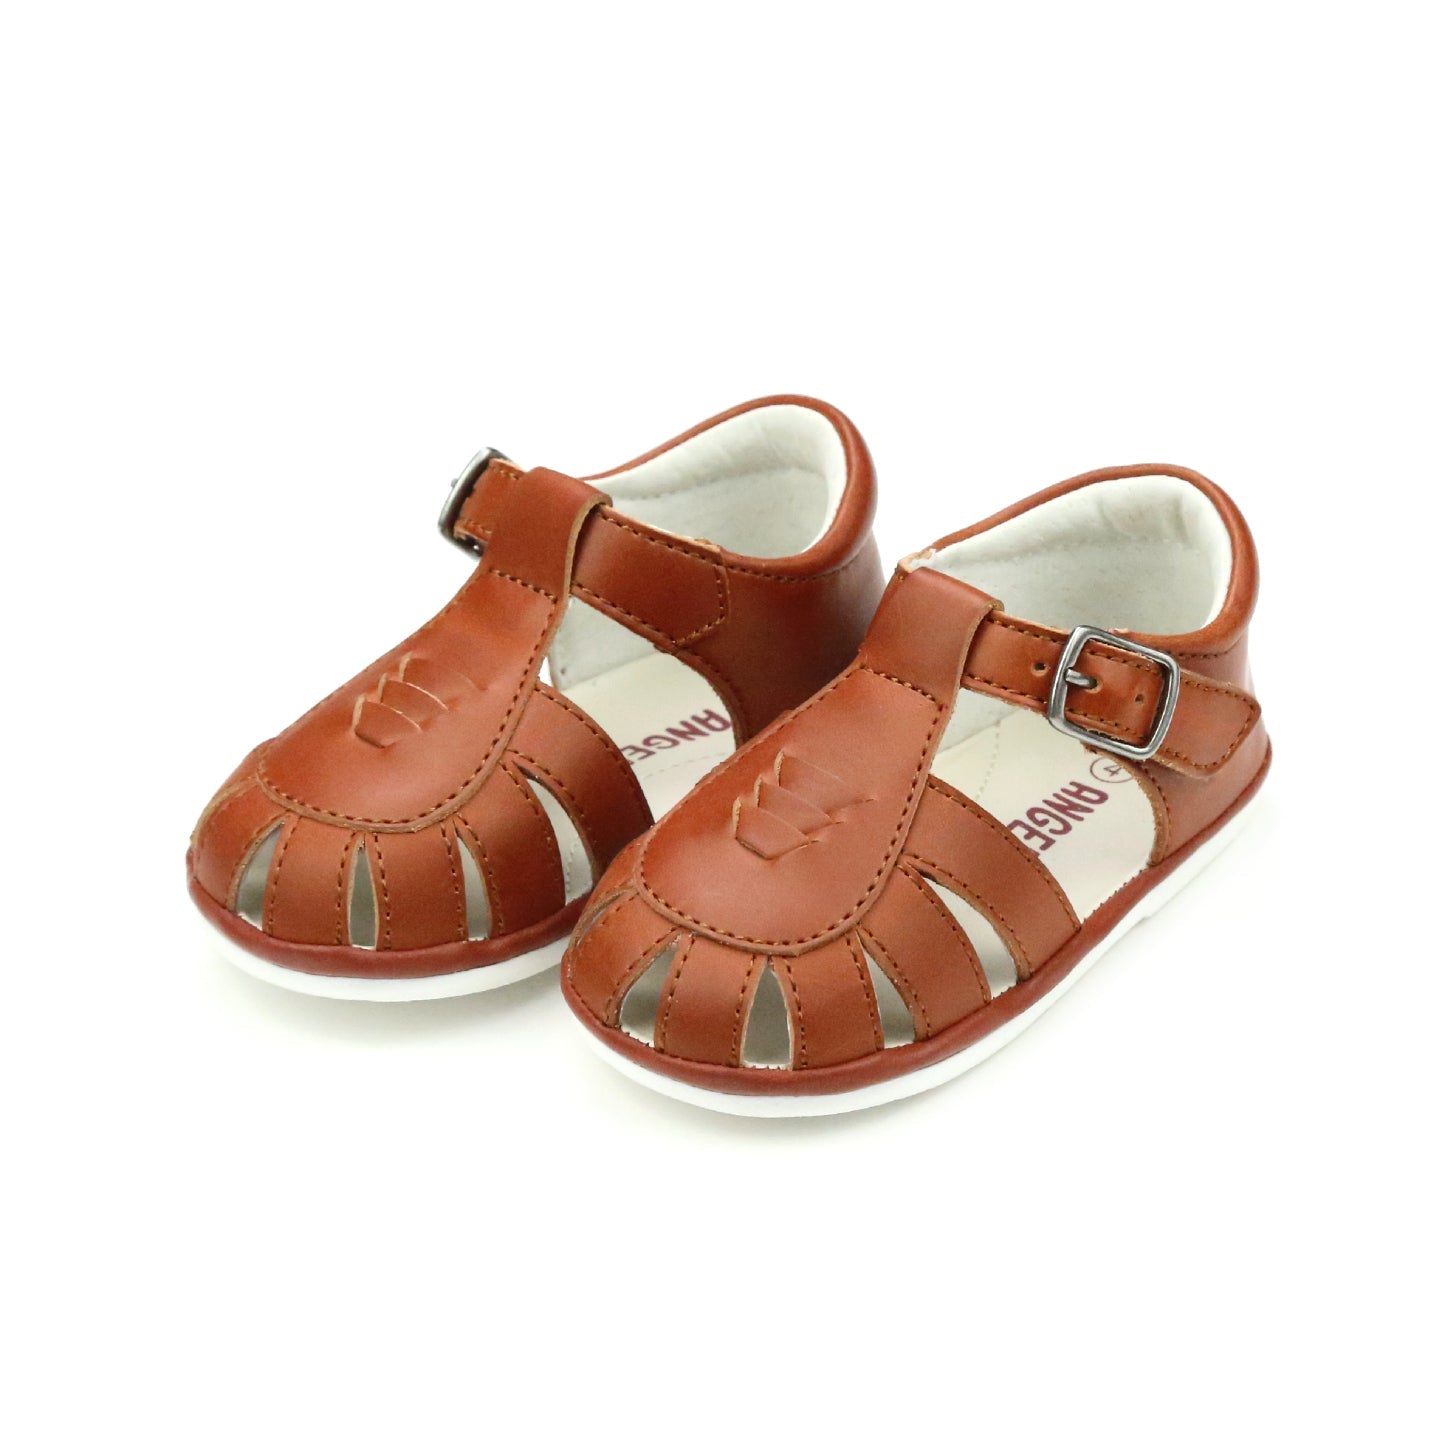 Henry Caged Leather Sandal - Babies & Toddlers